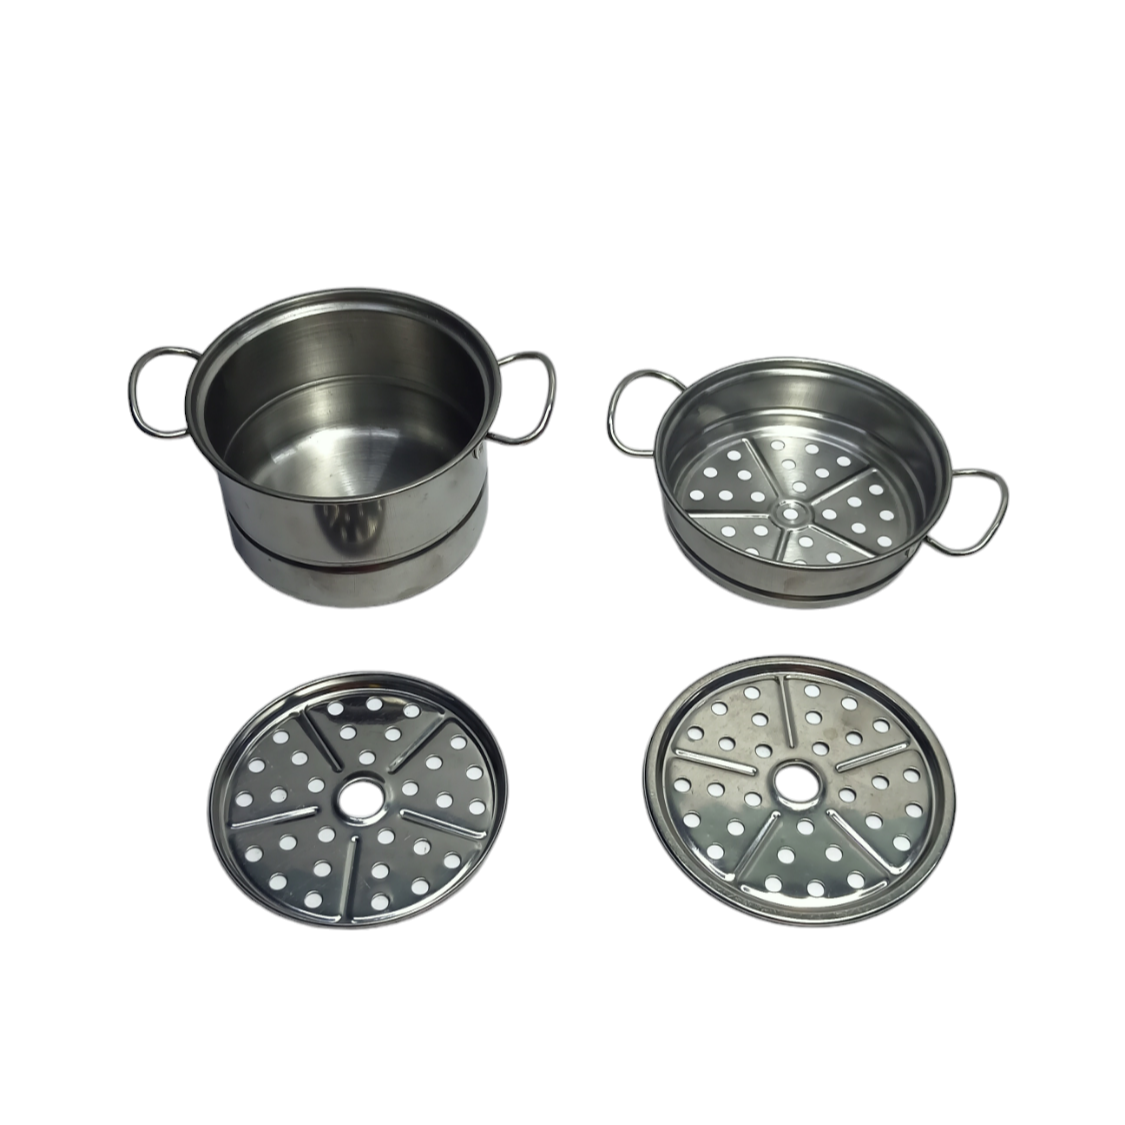 Imported Stainless Steel Kitchen Set